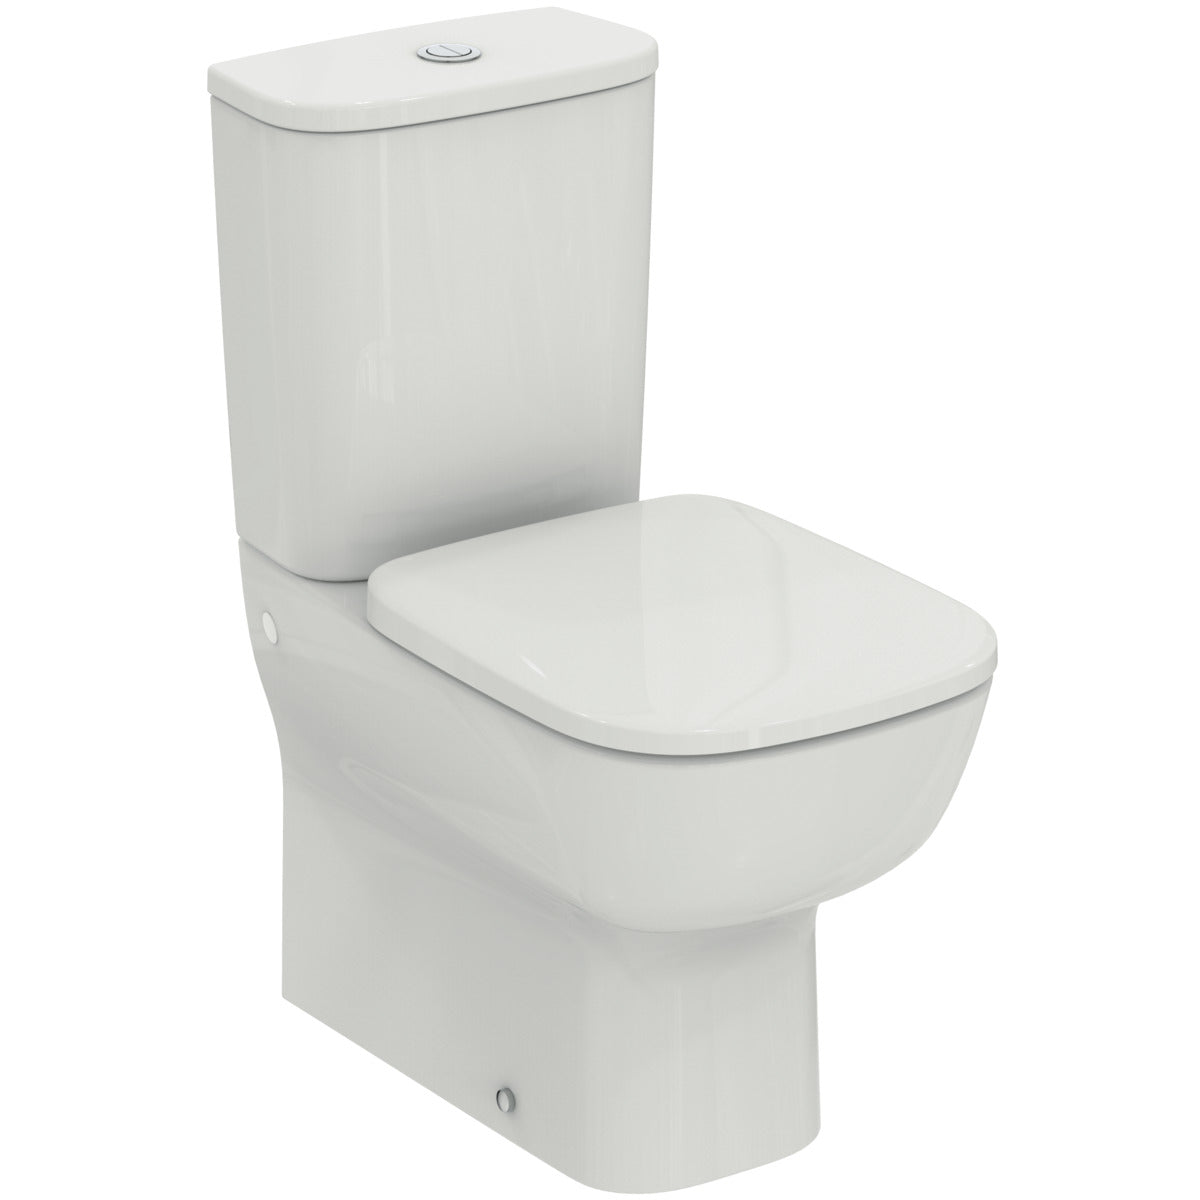 Ideal Standard New Esedra WC - Premium Toilets from Ideal Standard - Just GHS3500! Shop now at Kimo in Ghana